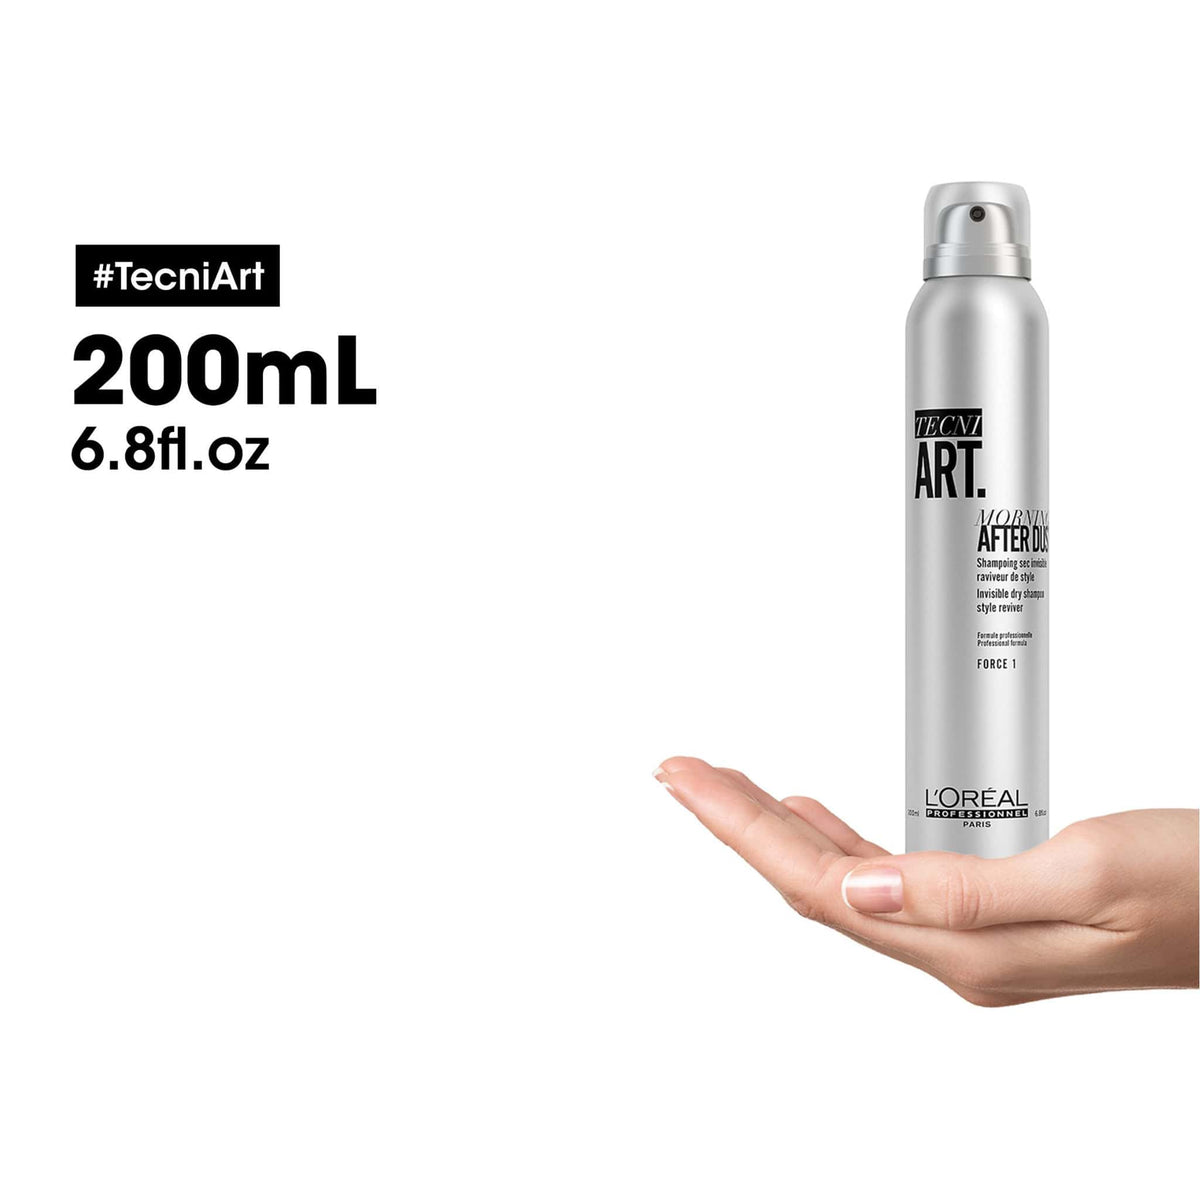 L&#39;Oreal professionnel Tecni Art Morning After Dust 200ml